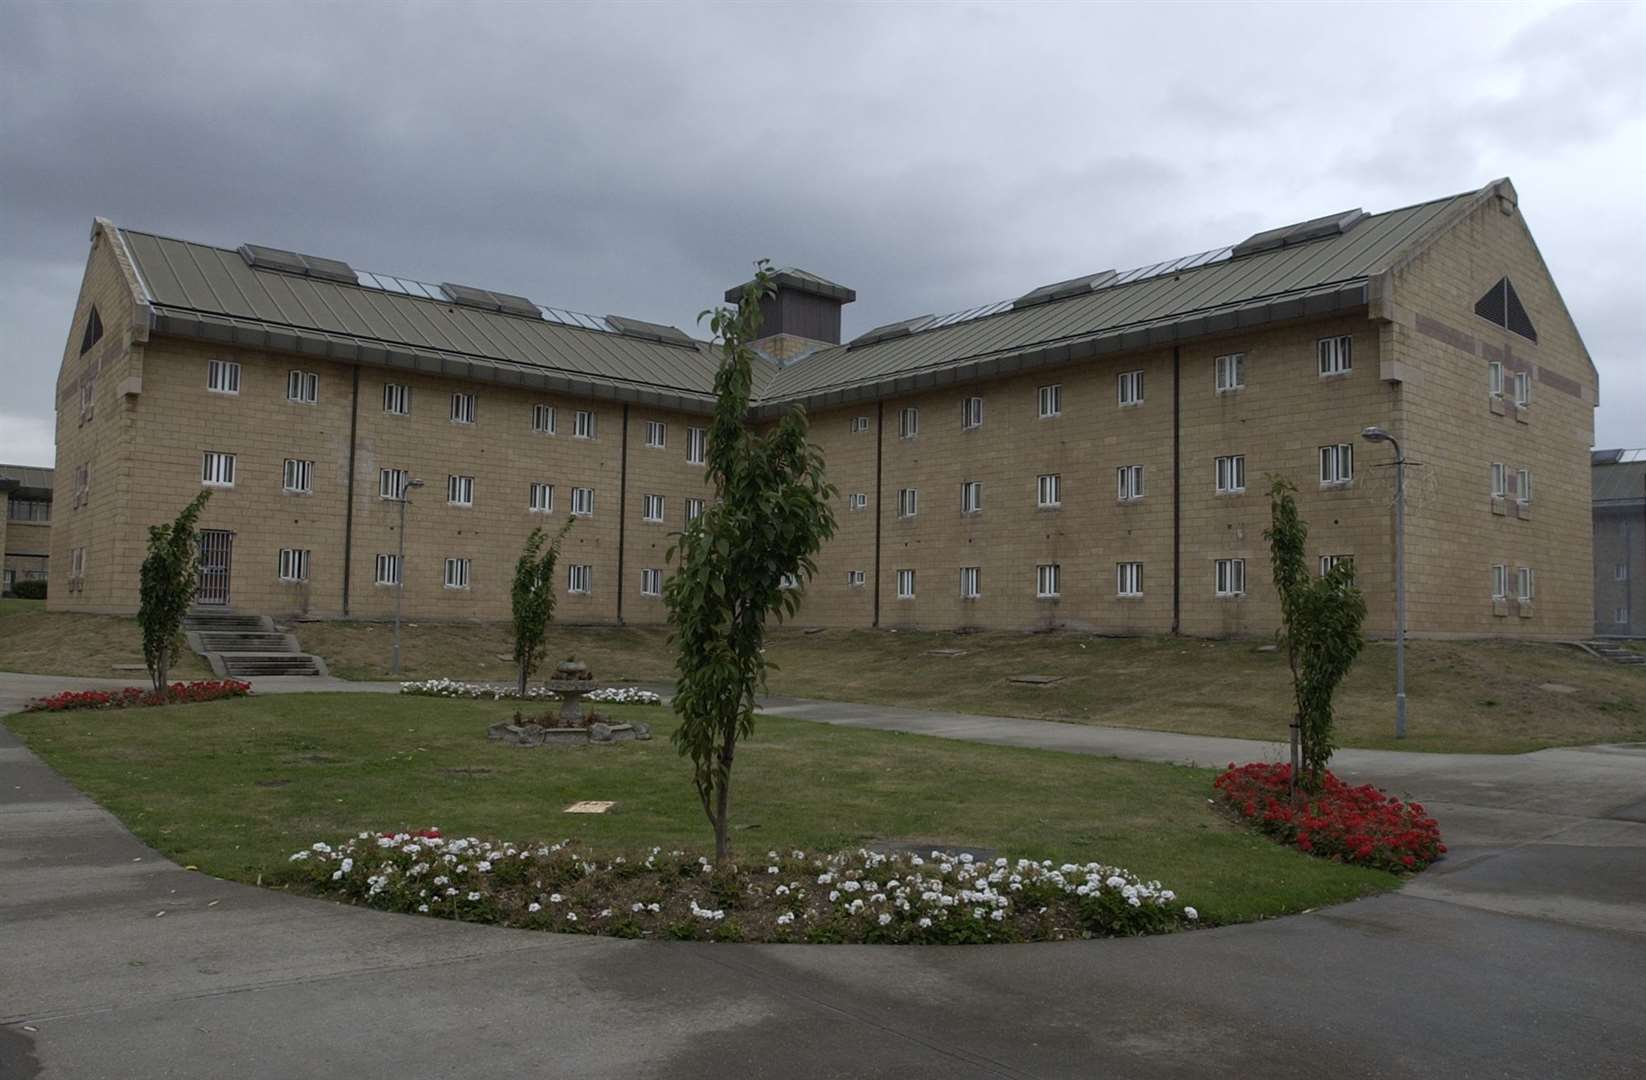 A prison officer from HMP Elmley on the Isle of Sheppey died after contracting Covid-19